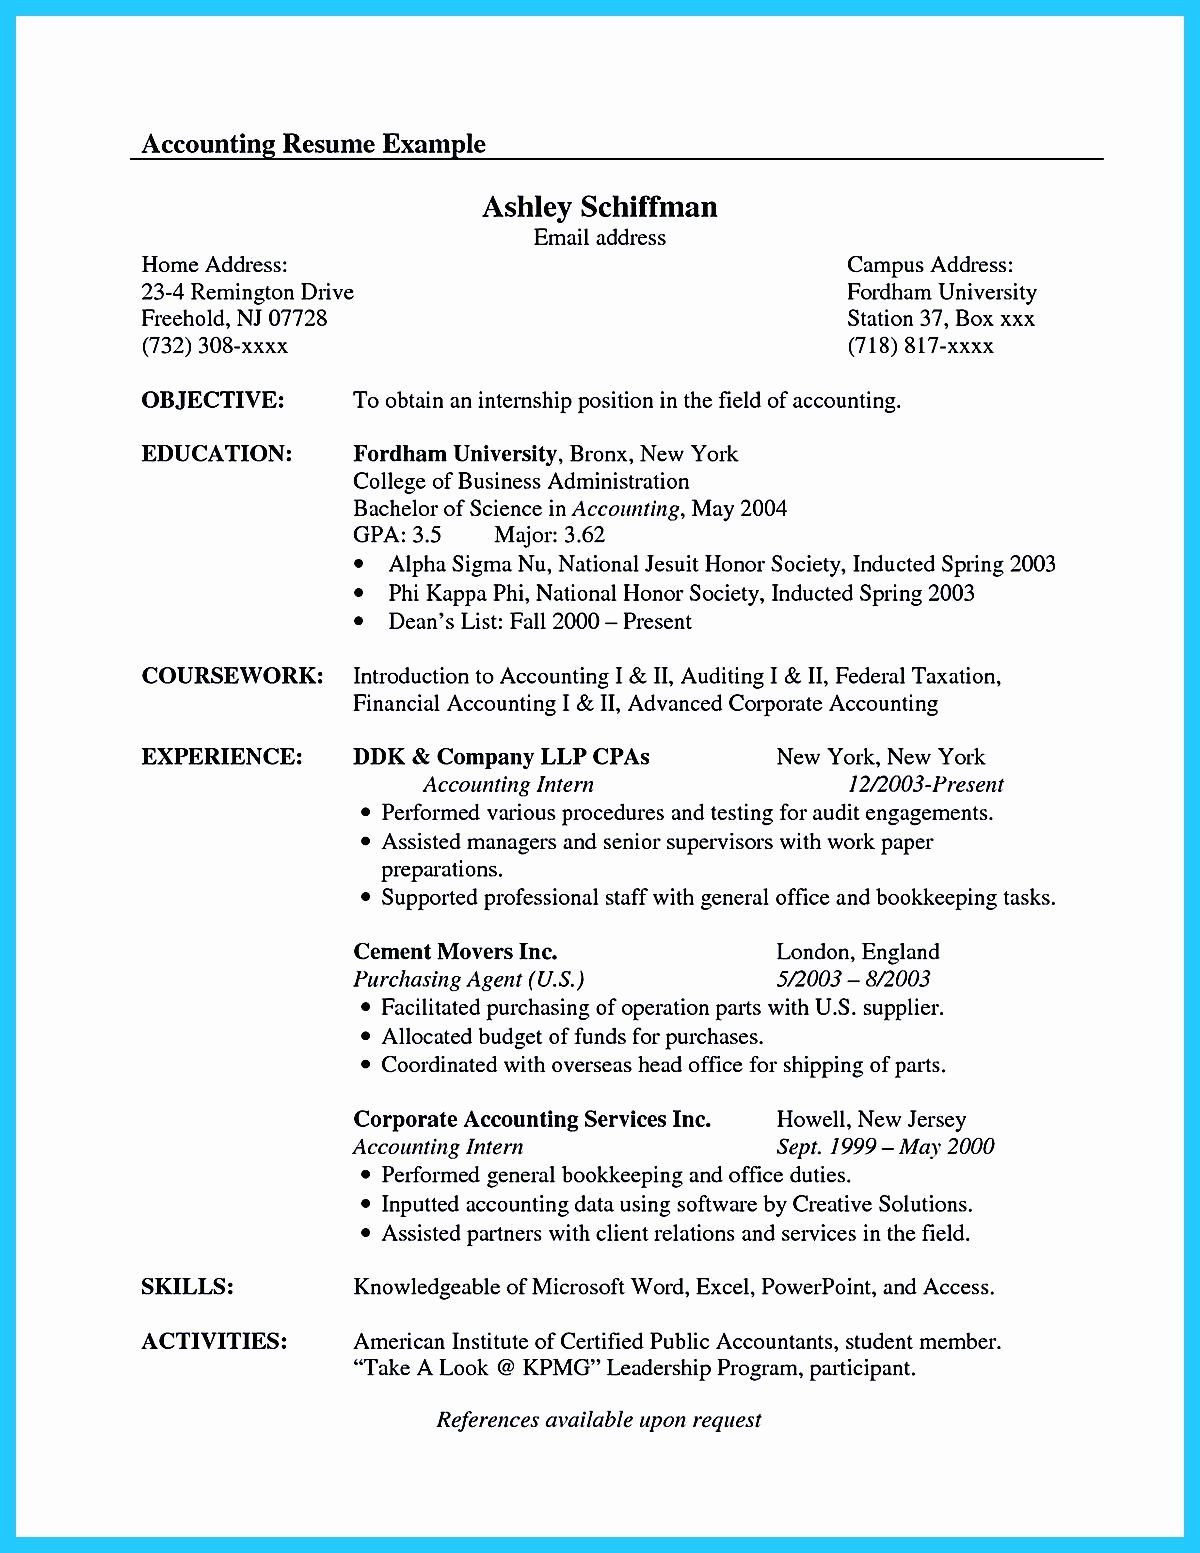 Sample Accounting Resume with No Experience Accounting Graduate Resume No Experienceâ¢ Printable Resume …